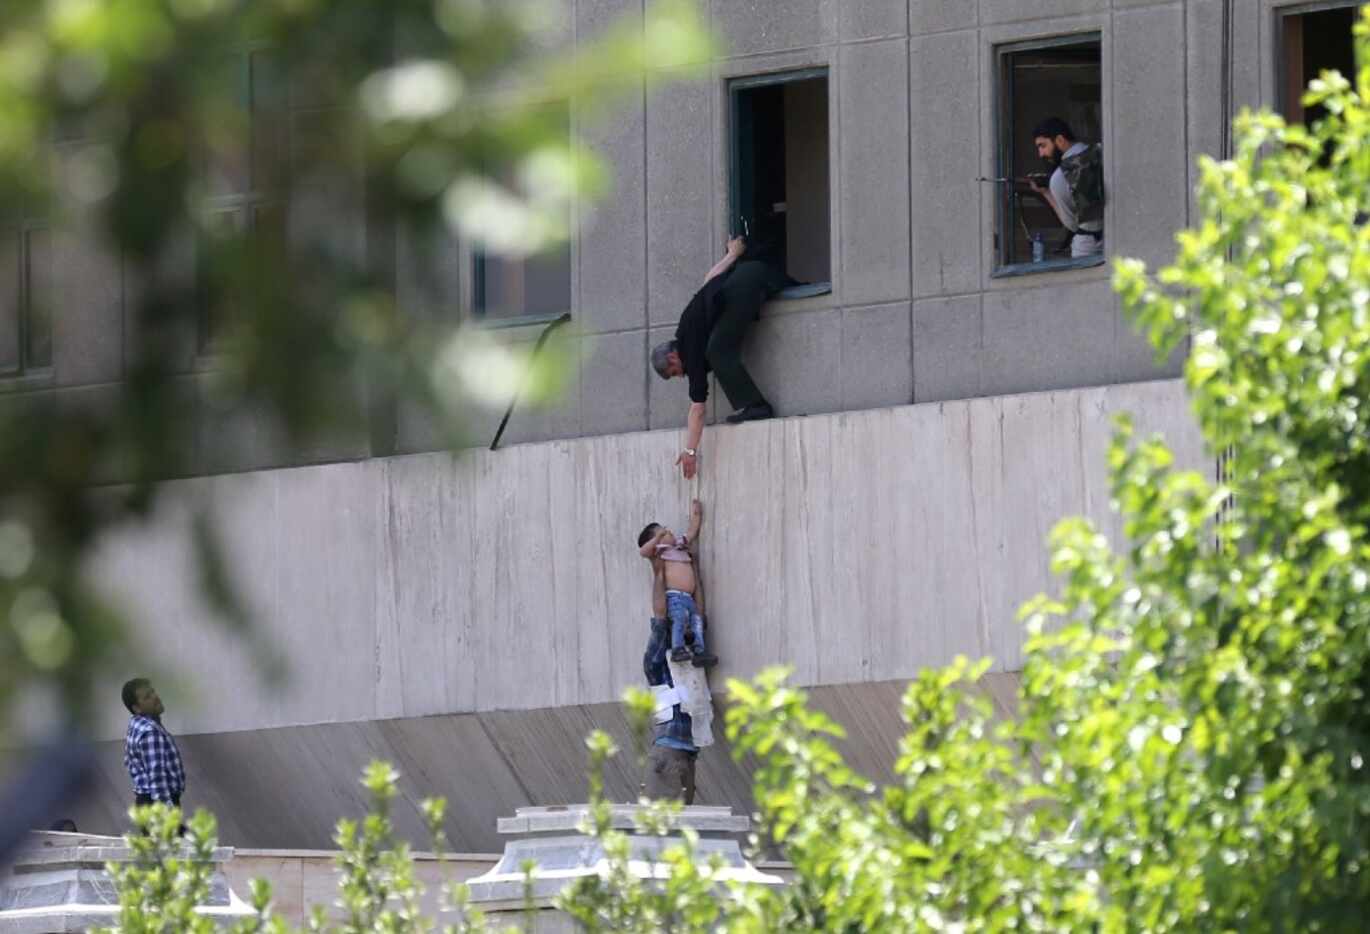 Iranian police evacuate a child from the parliament building in Tehran on June 7, 2017....